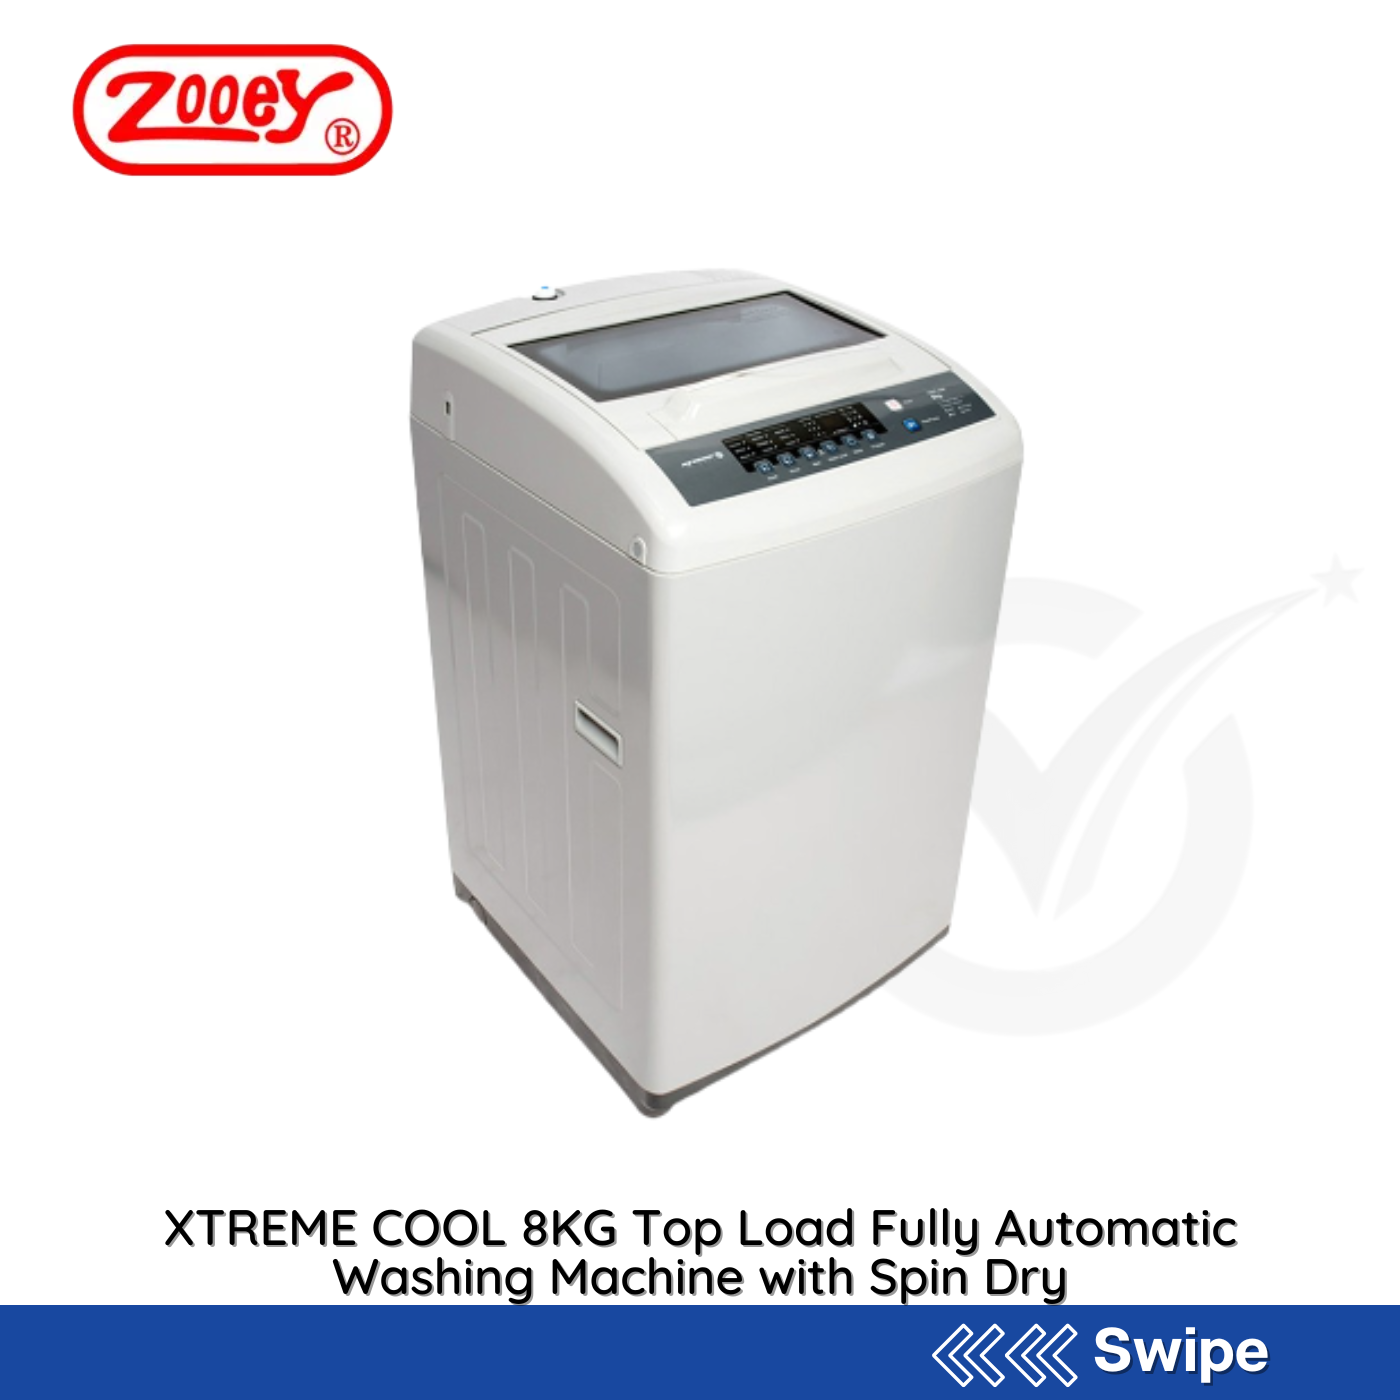 XTREME COOL 8KG Top Load Fully Automatic Washing Machine with Spin Dry